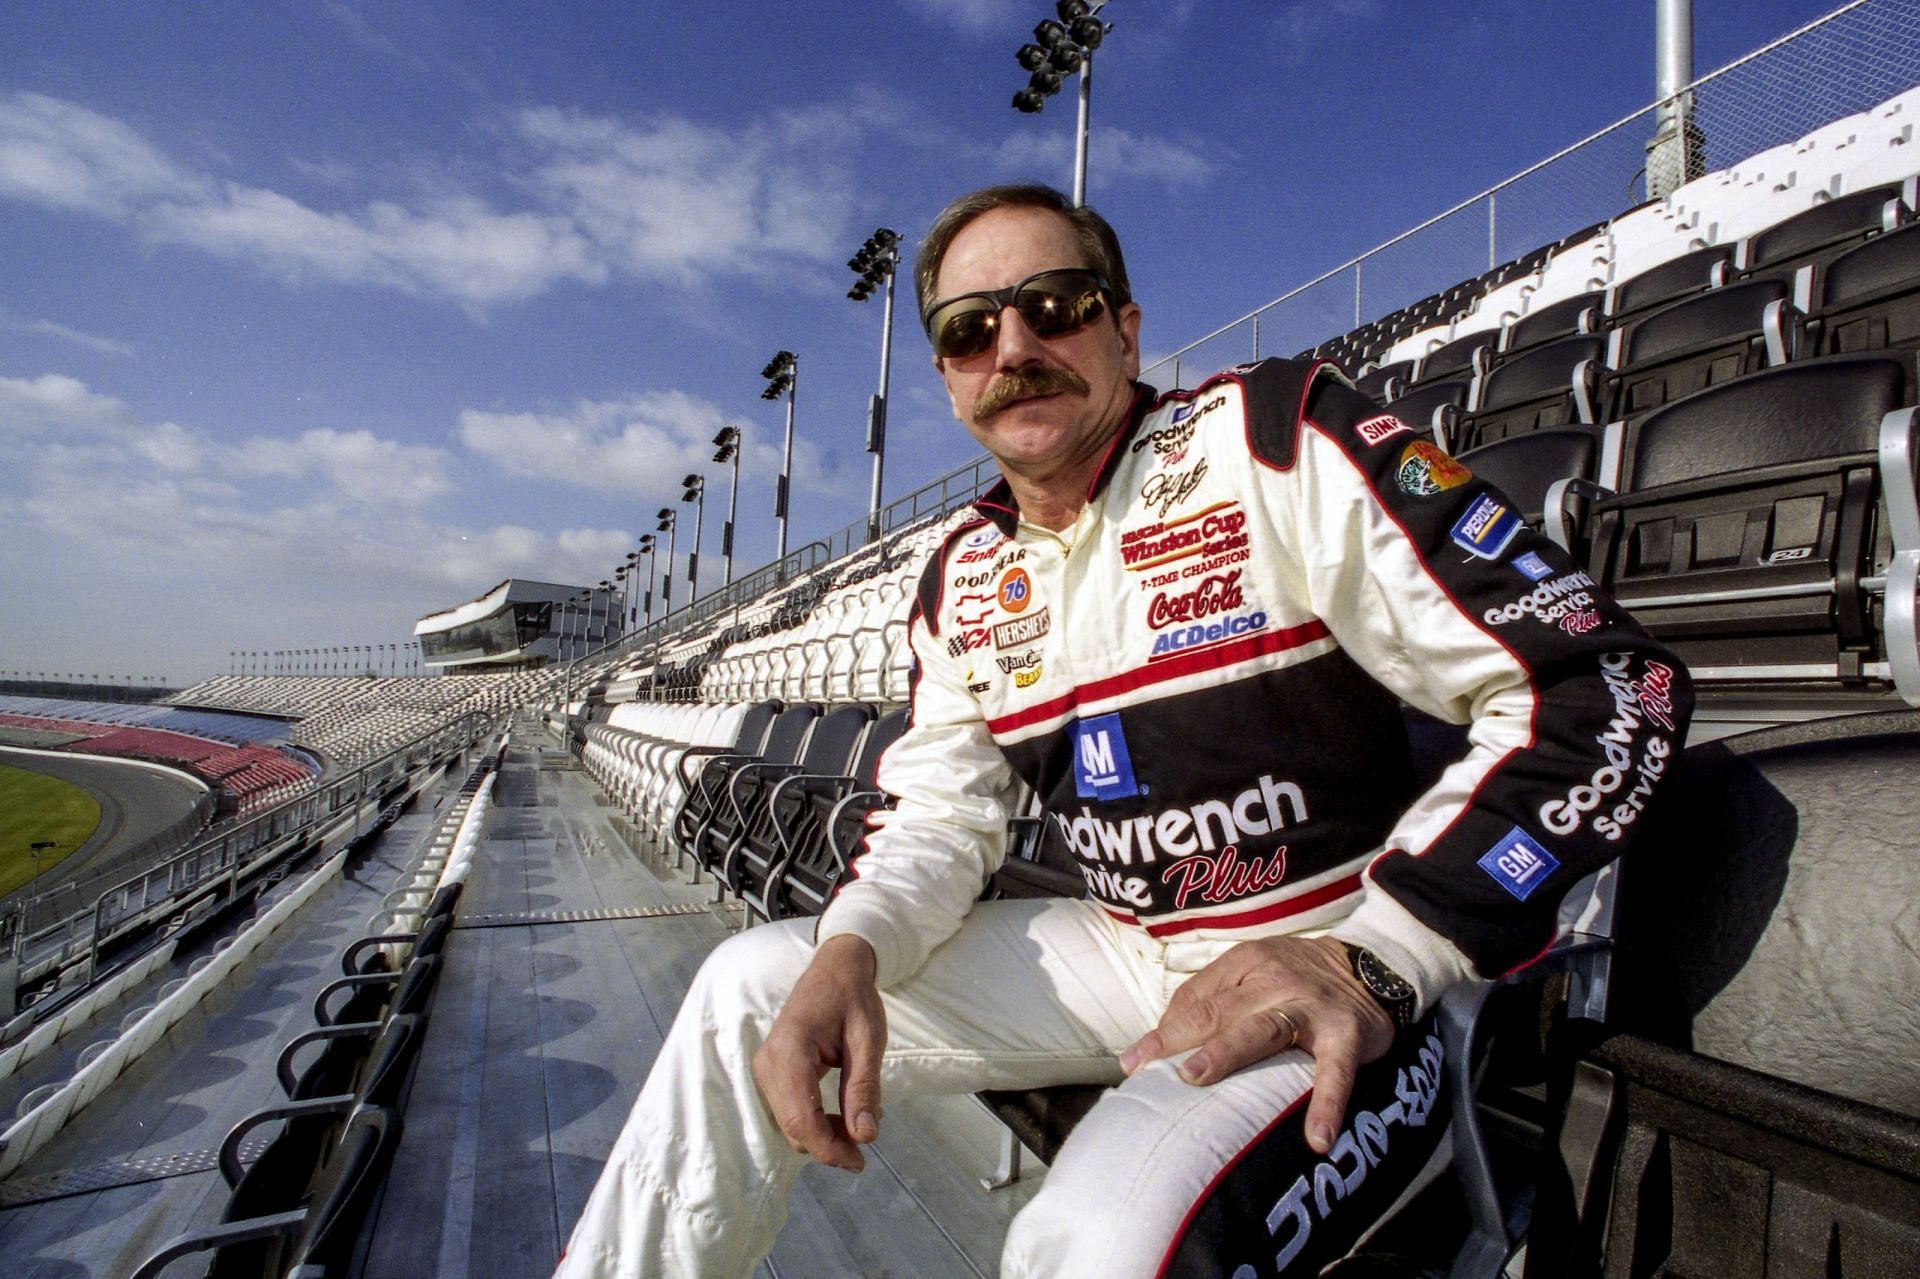 A general shot of Dale Earnhardt sitting in the grandstands at an unnamed oval track.